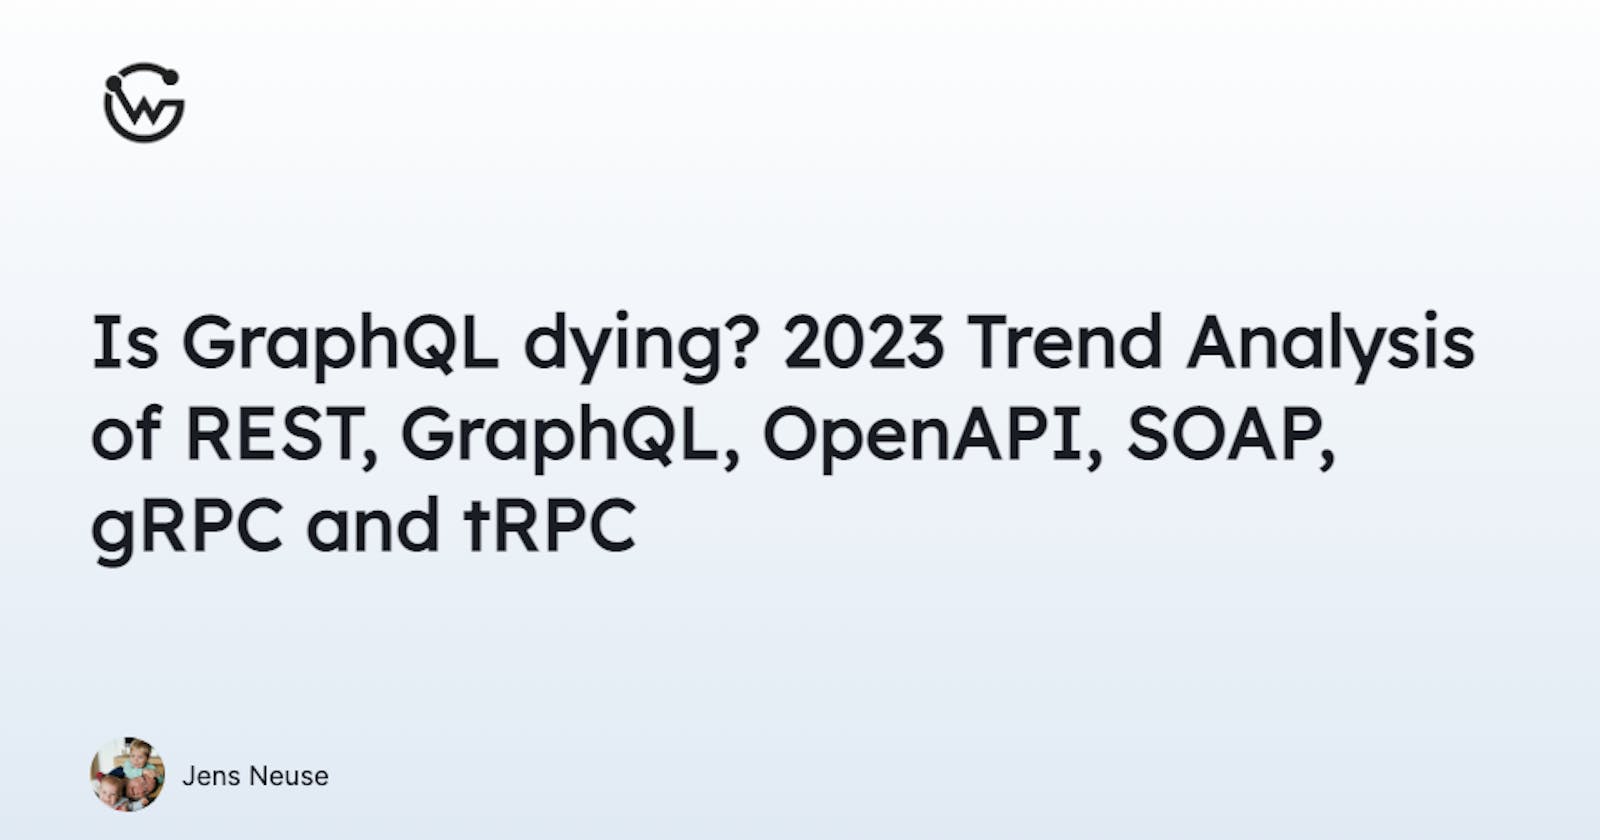 Is GraphQL dying? 2023 Trend Analysis of REST, GraphQL, OpenAPI, SOAP, gRPC and tRPC